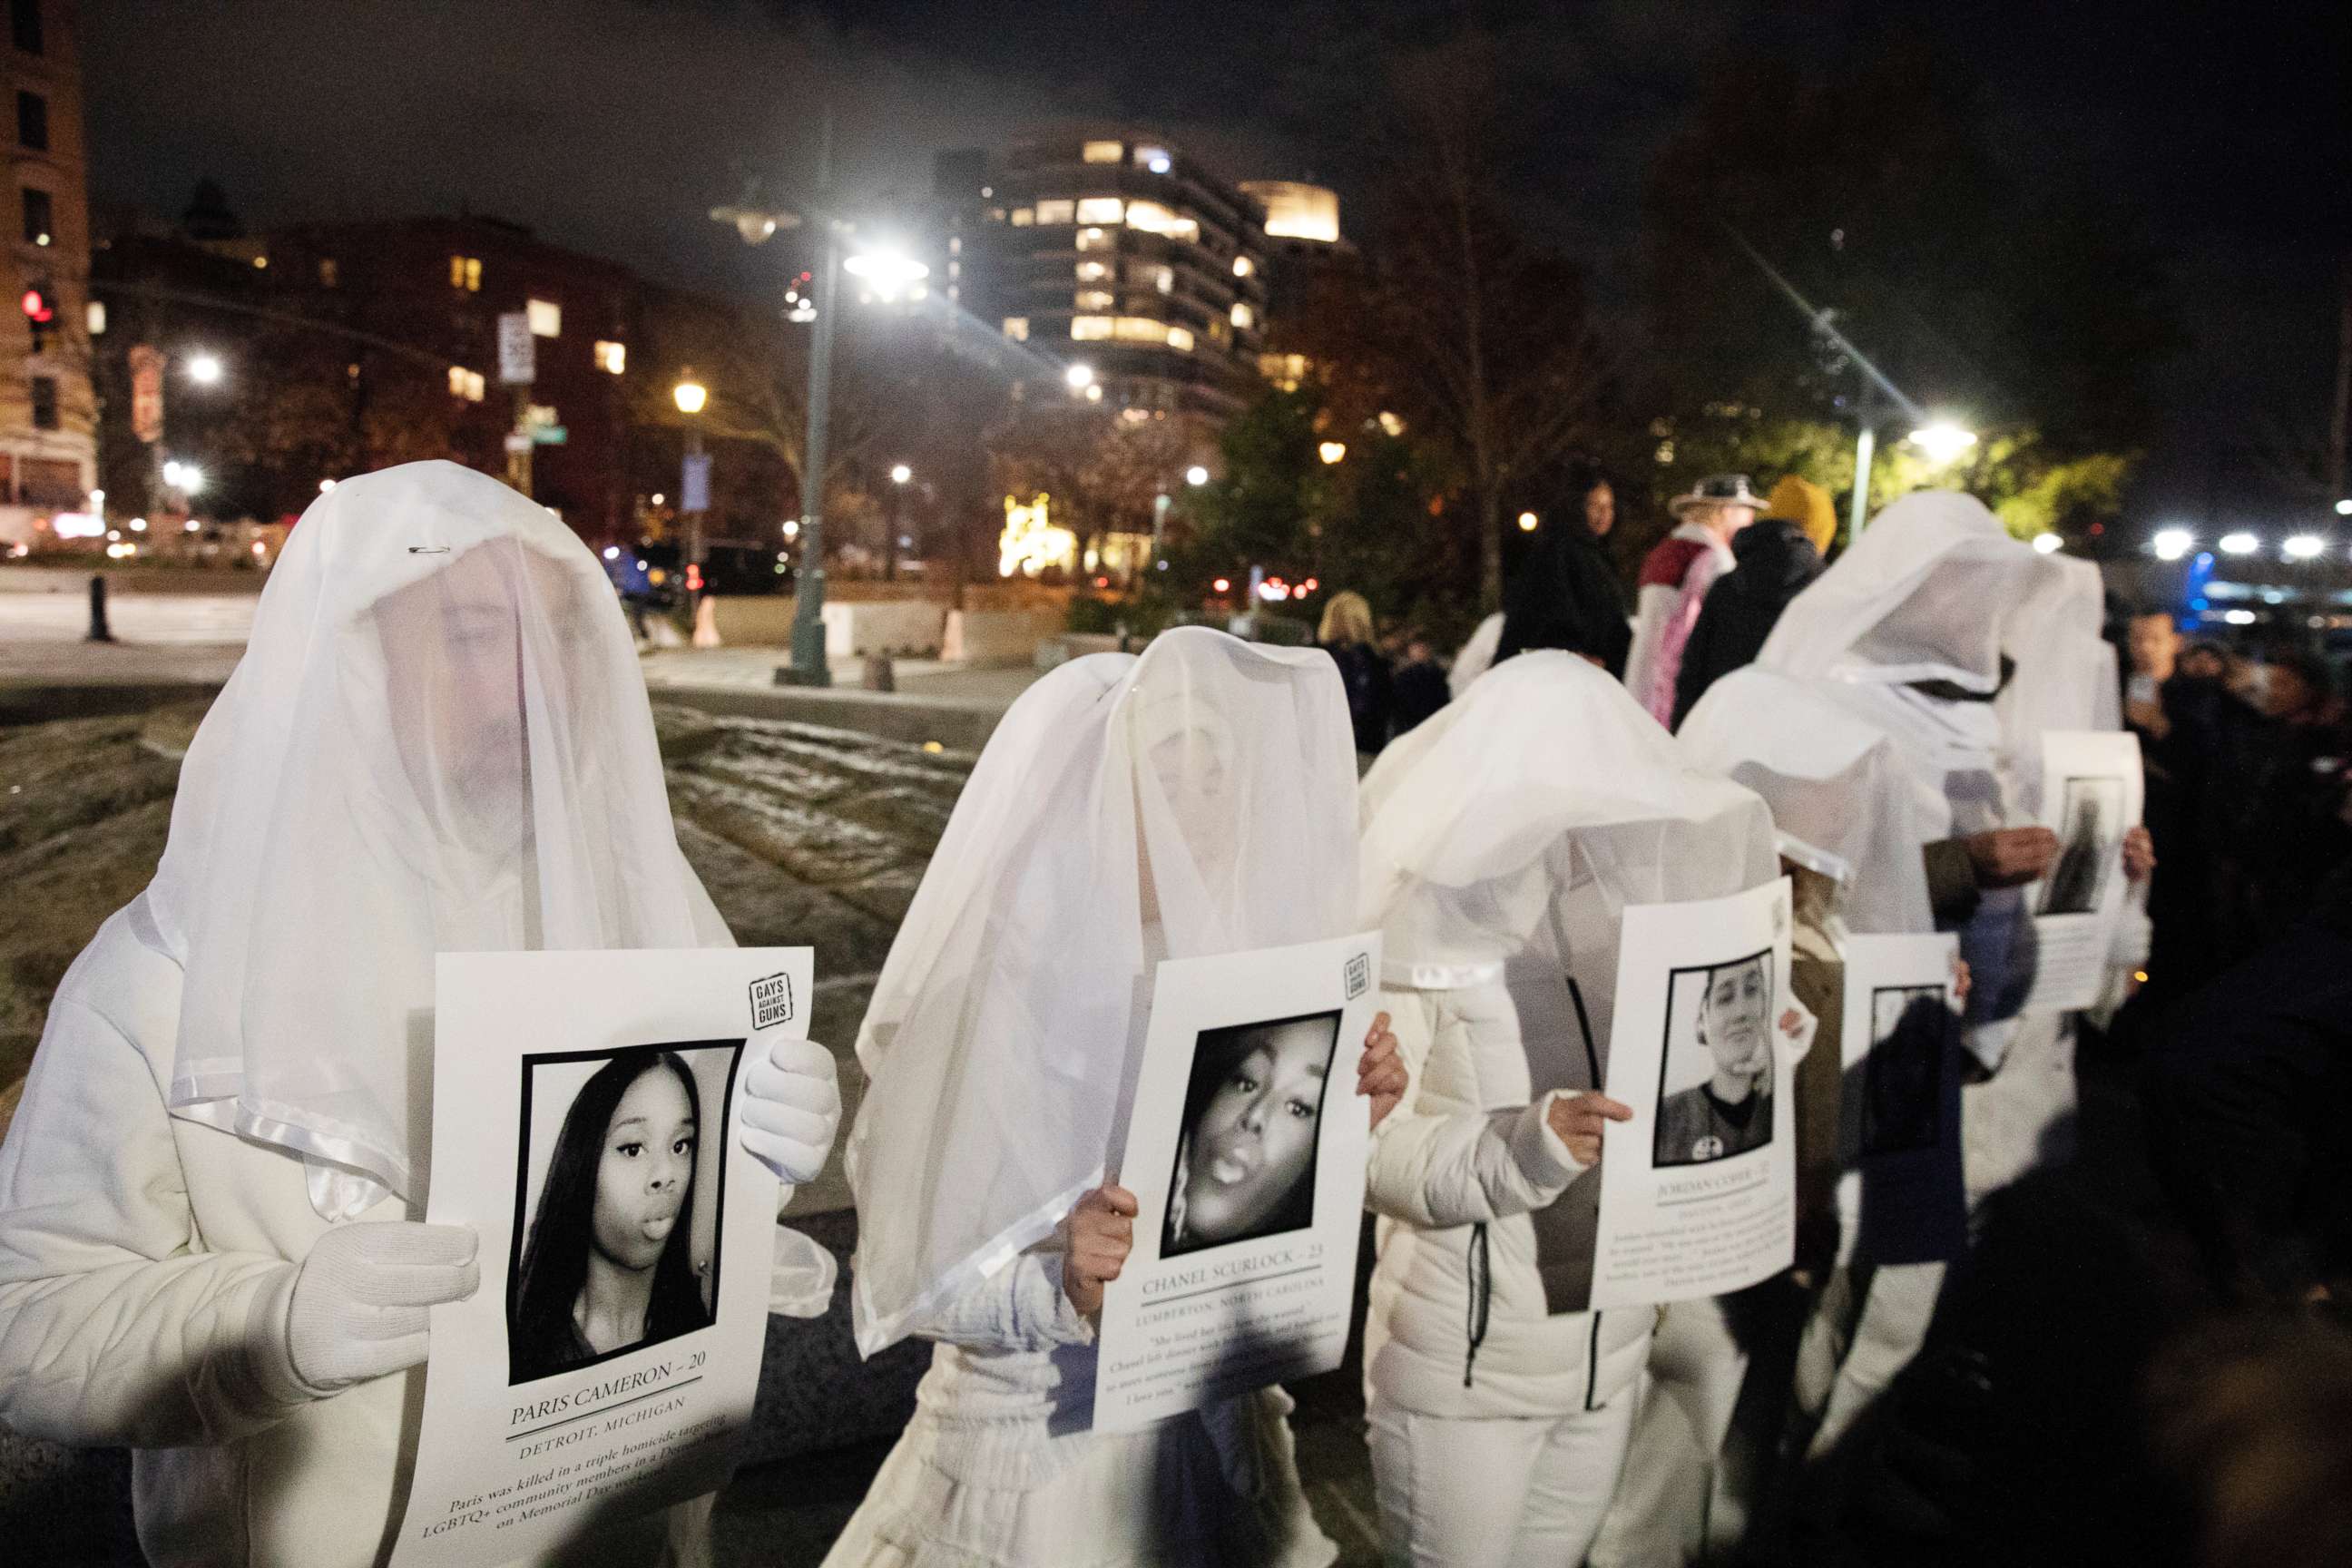 PHOTO: Activists dress in white and hold images of slain members of the LGBTQ community during a demonstration to commemorate Transgender Day of Remembrance in New York, Nov. 20, 2019.